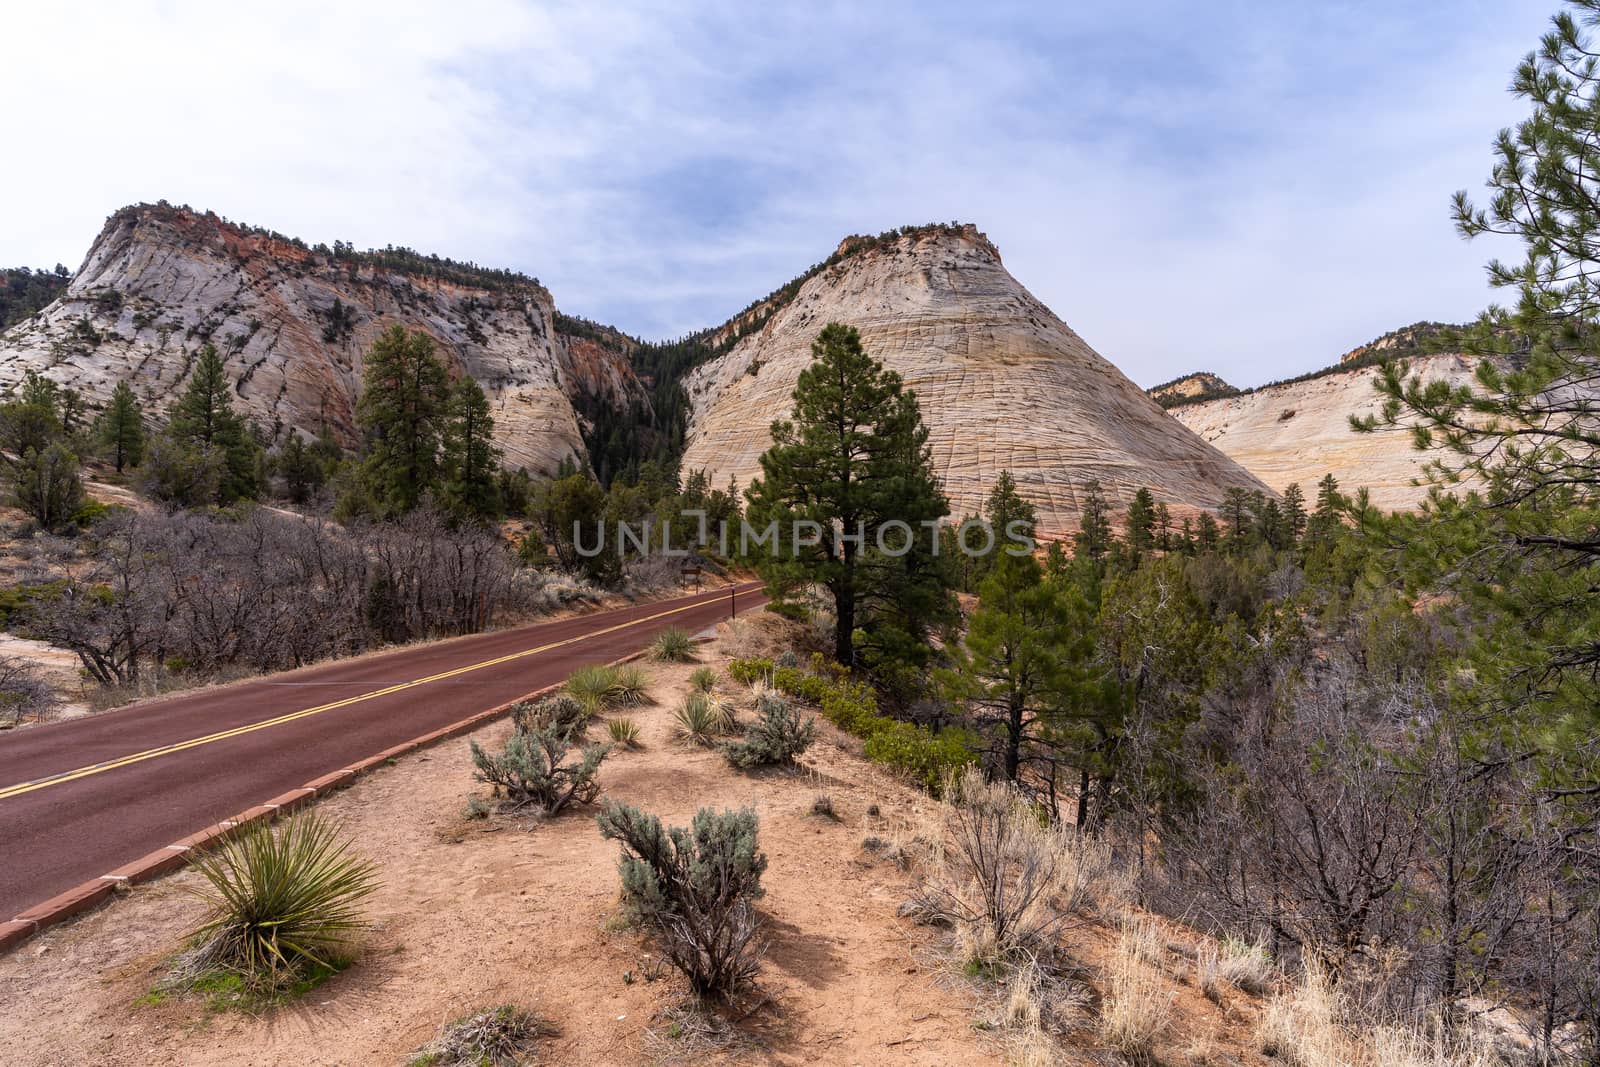 Checkerboard Mesa at Zion national park by vichie81